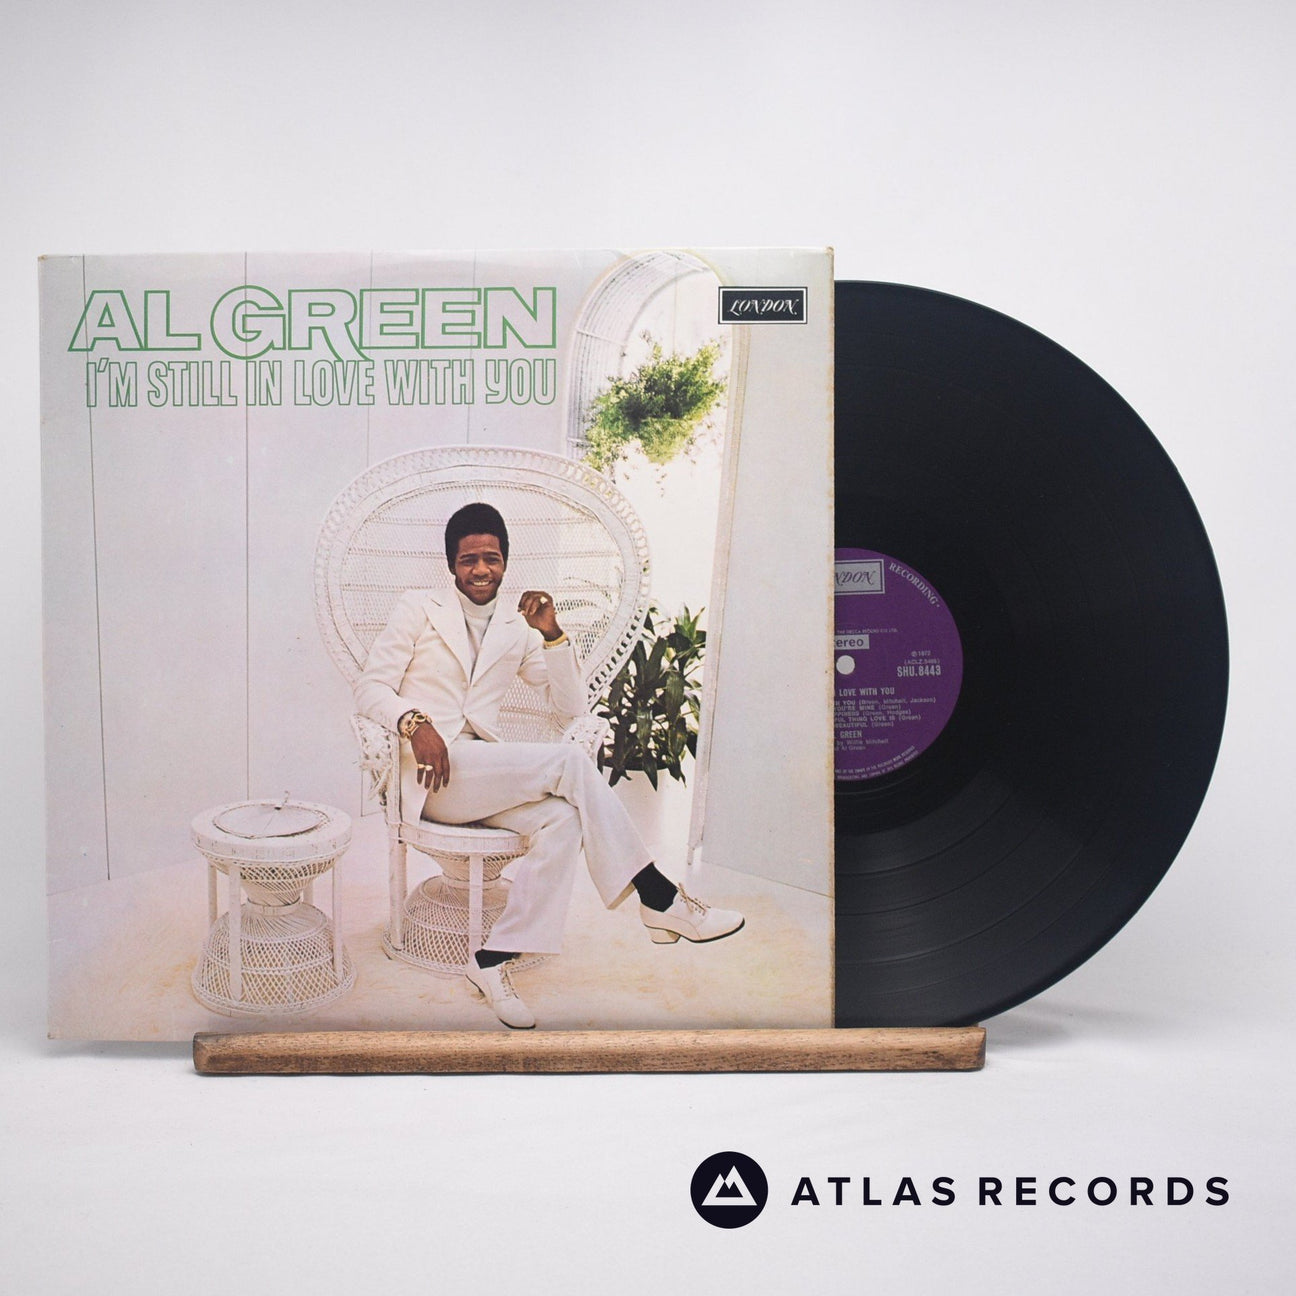 Al Green I'm Still In Love With You LP Vinyl Record - Front Cover & Record